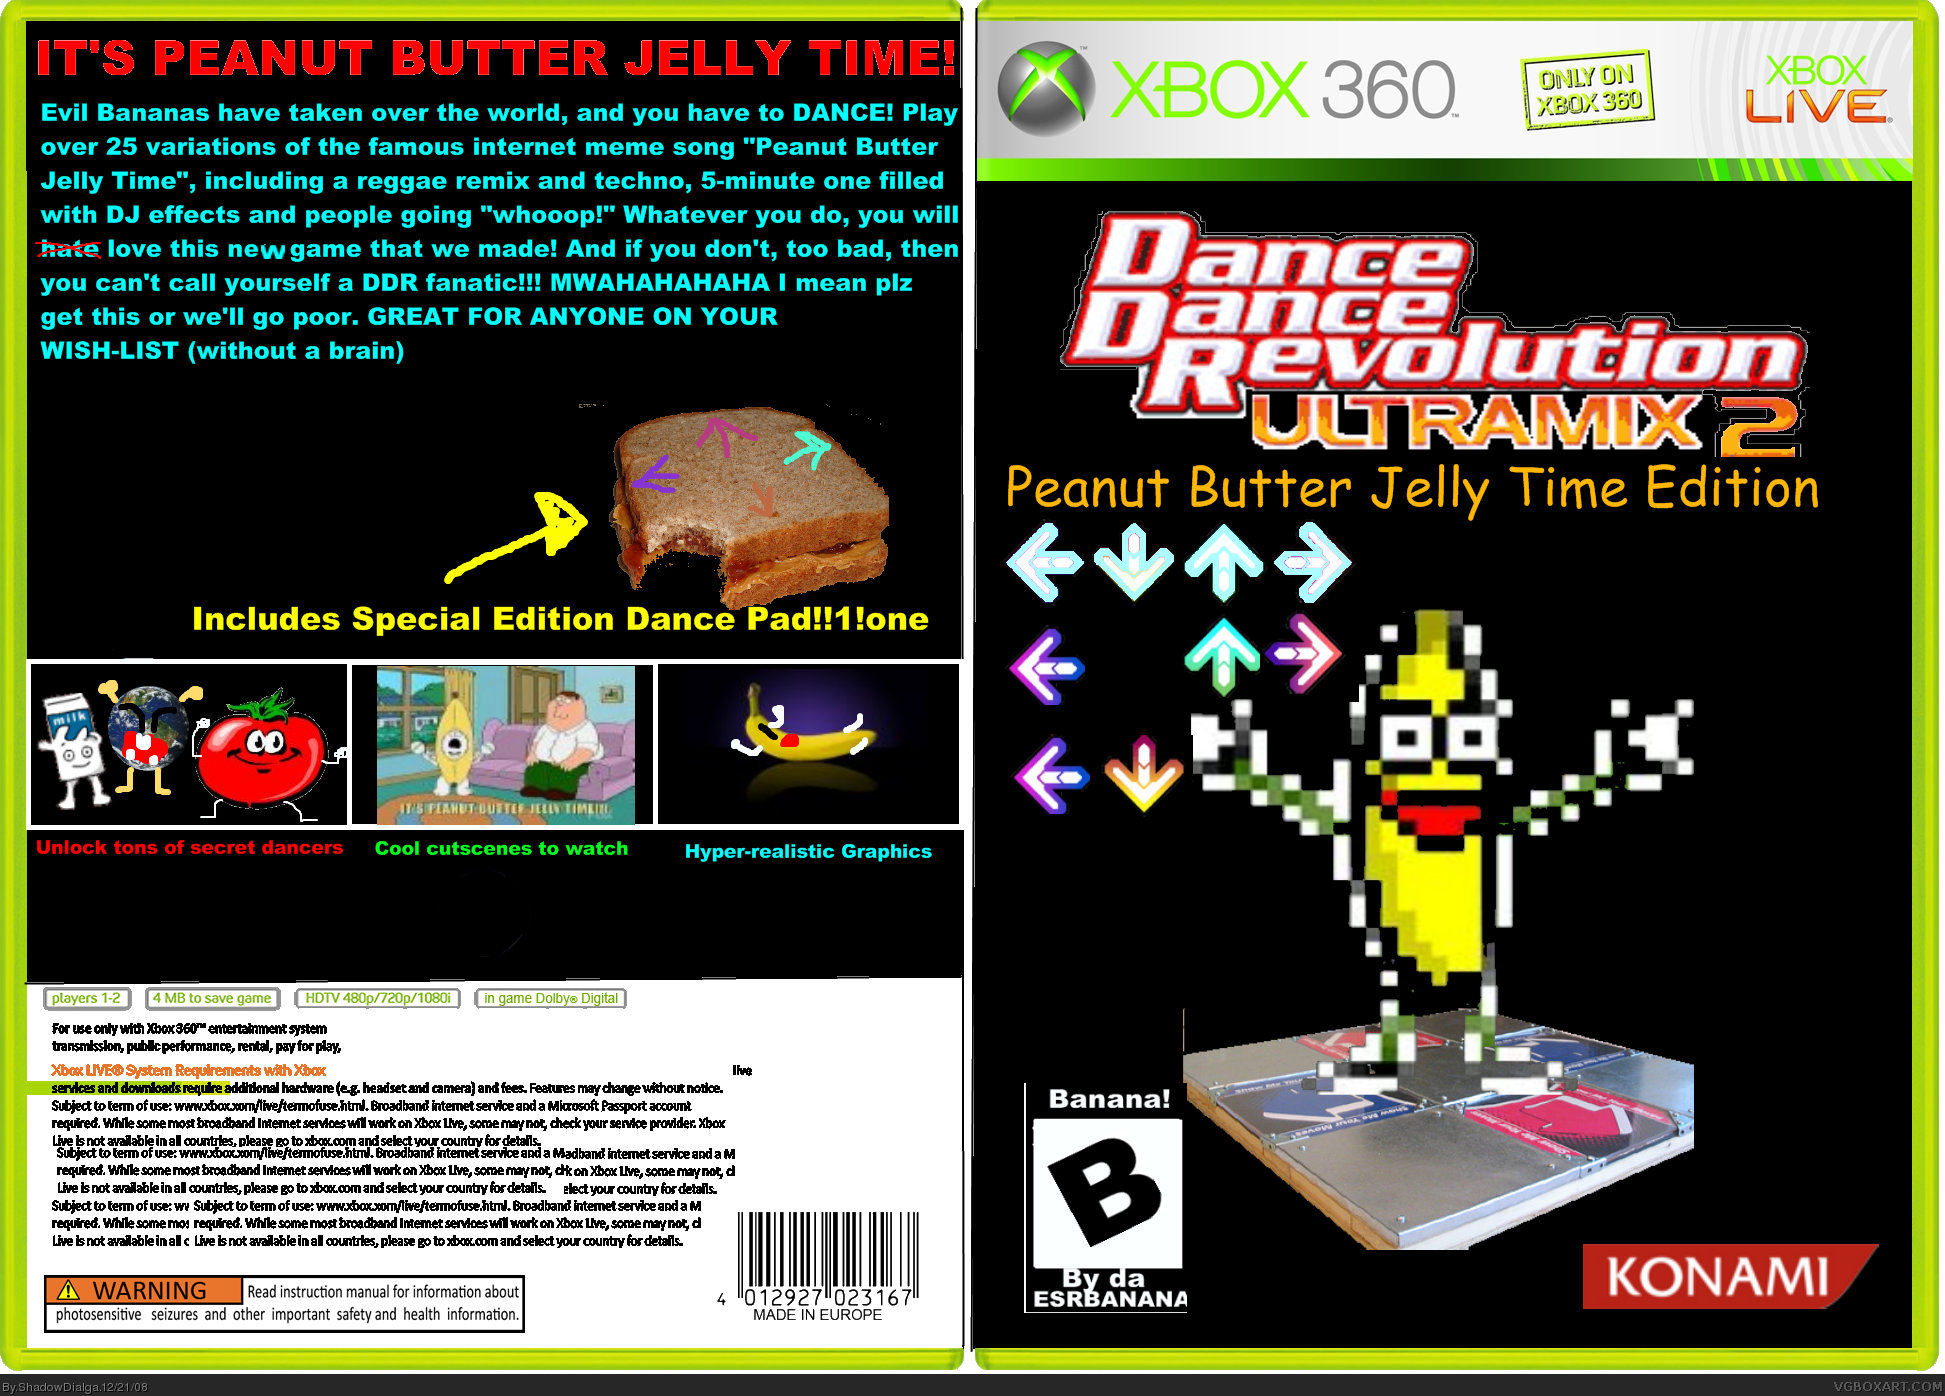 DDR: Peanut Butter Jelly Time Edition box cover